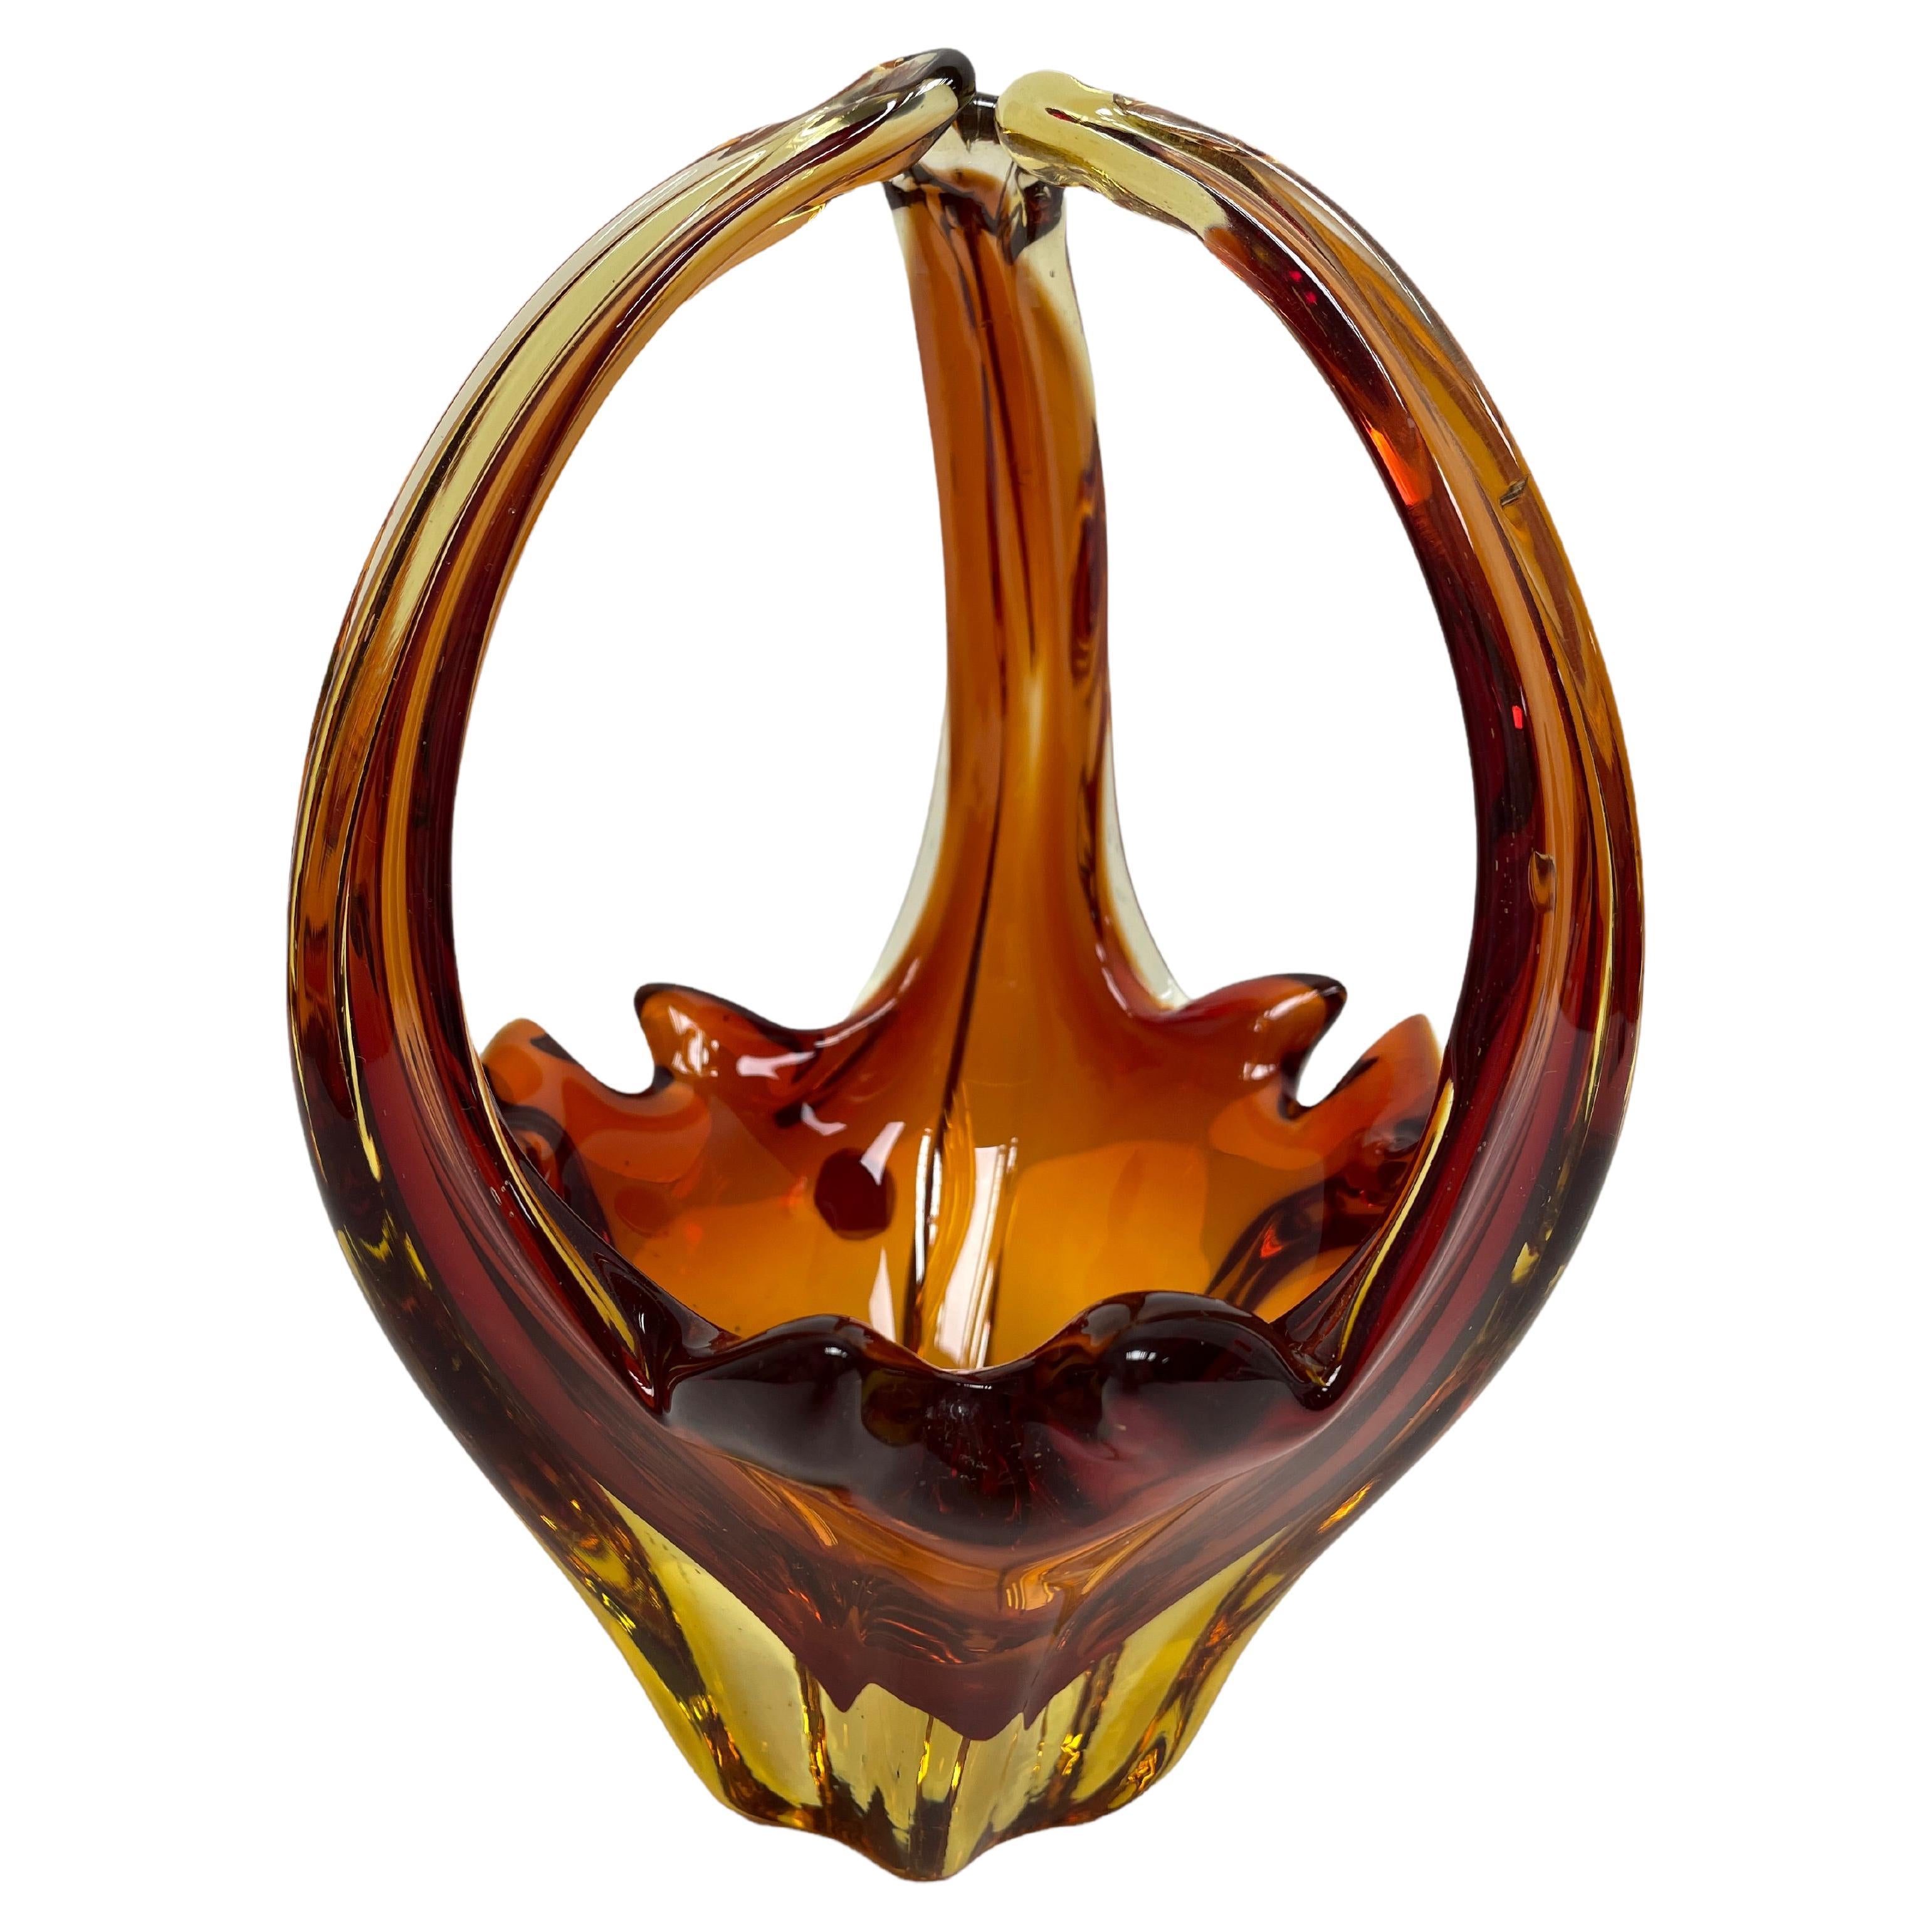 Murano Art Glass Amber Brown Basket Fruit Bowl Catchall Italy, Sommerso, 1970s